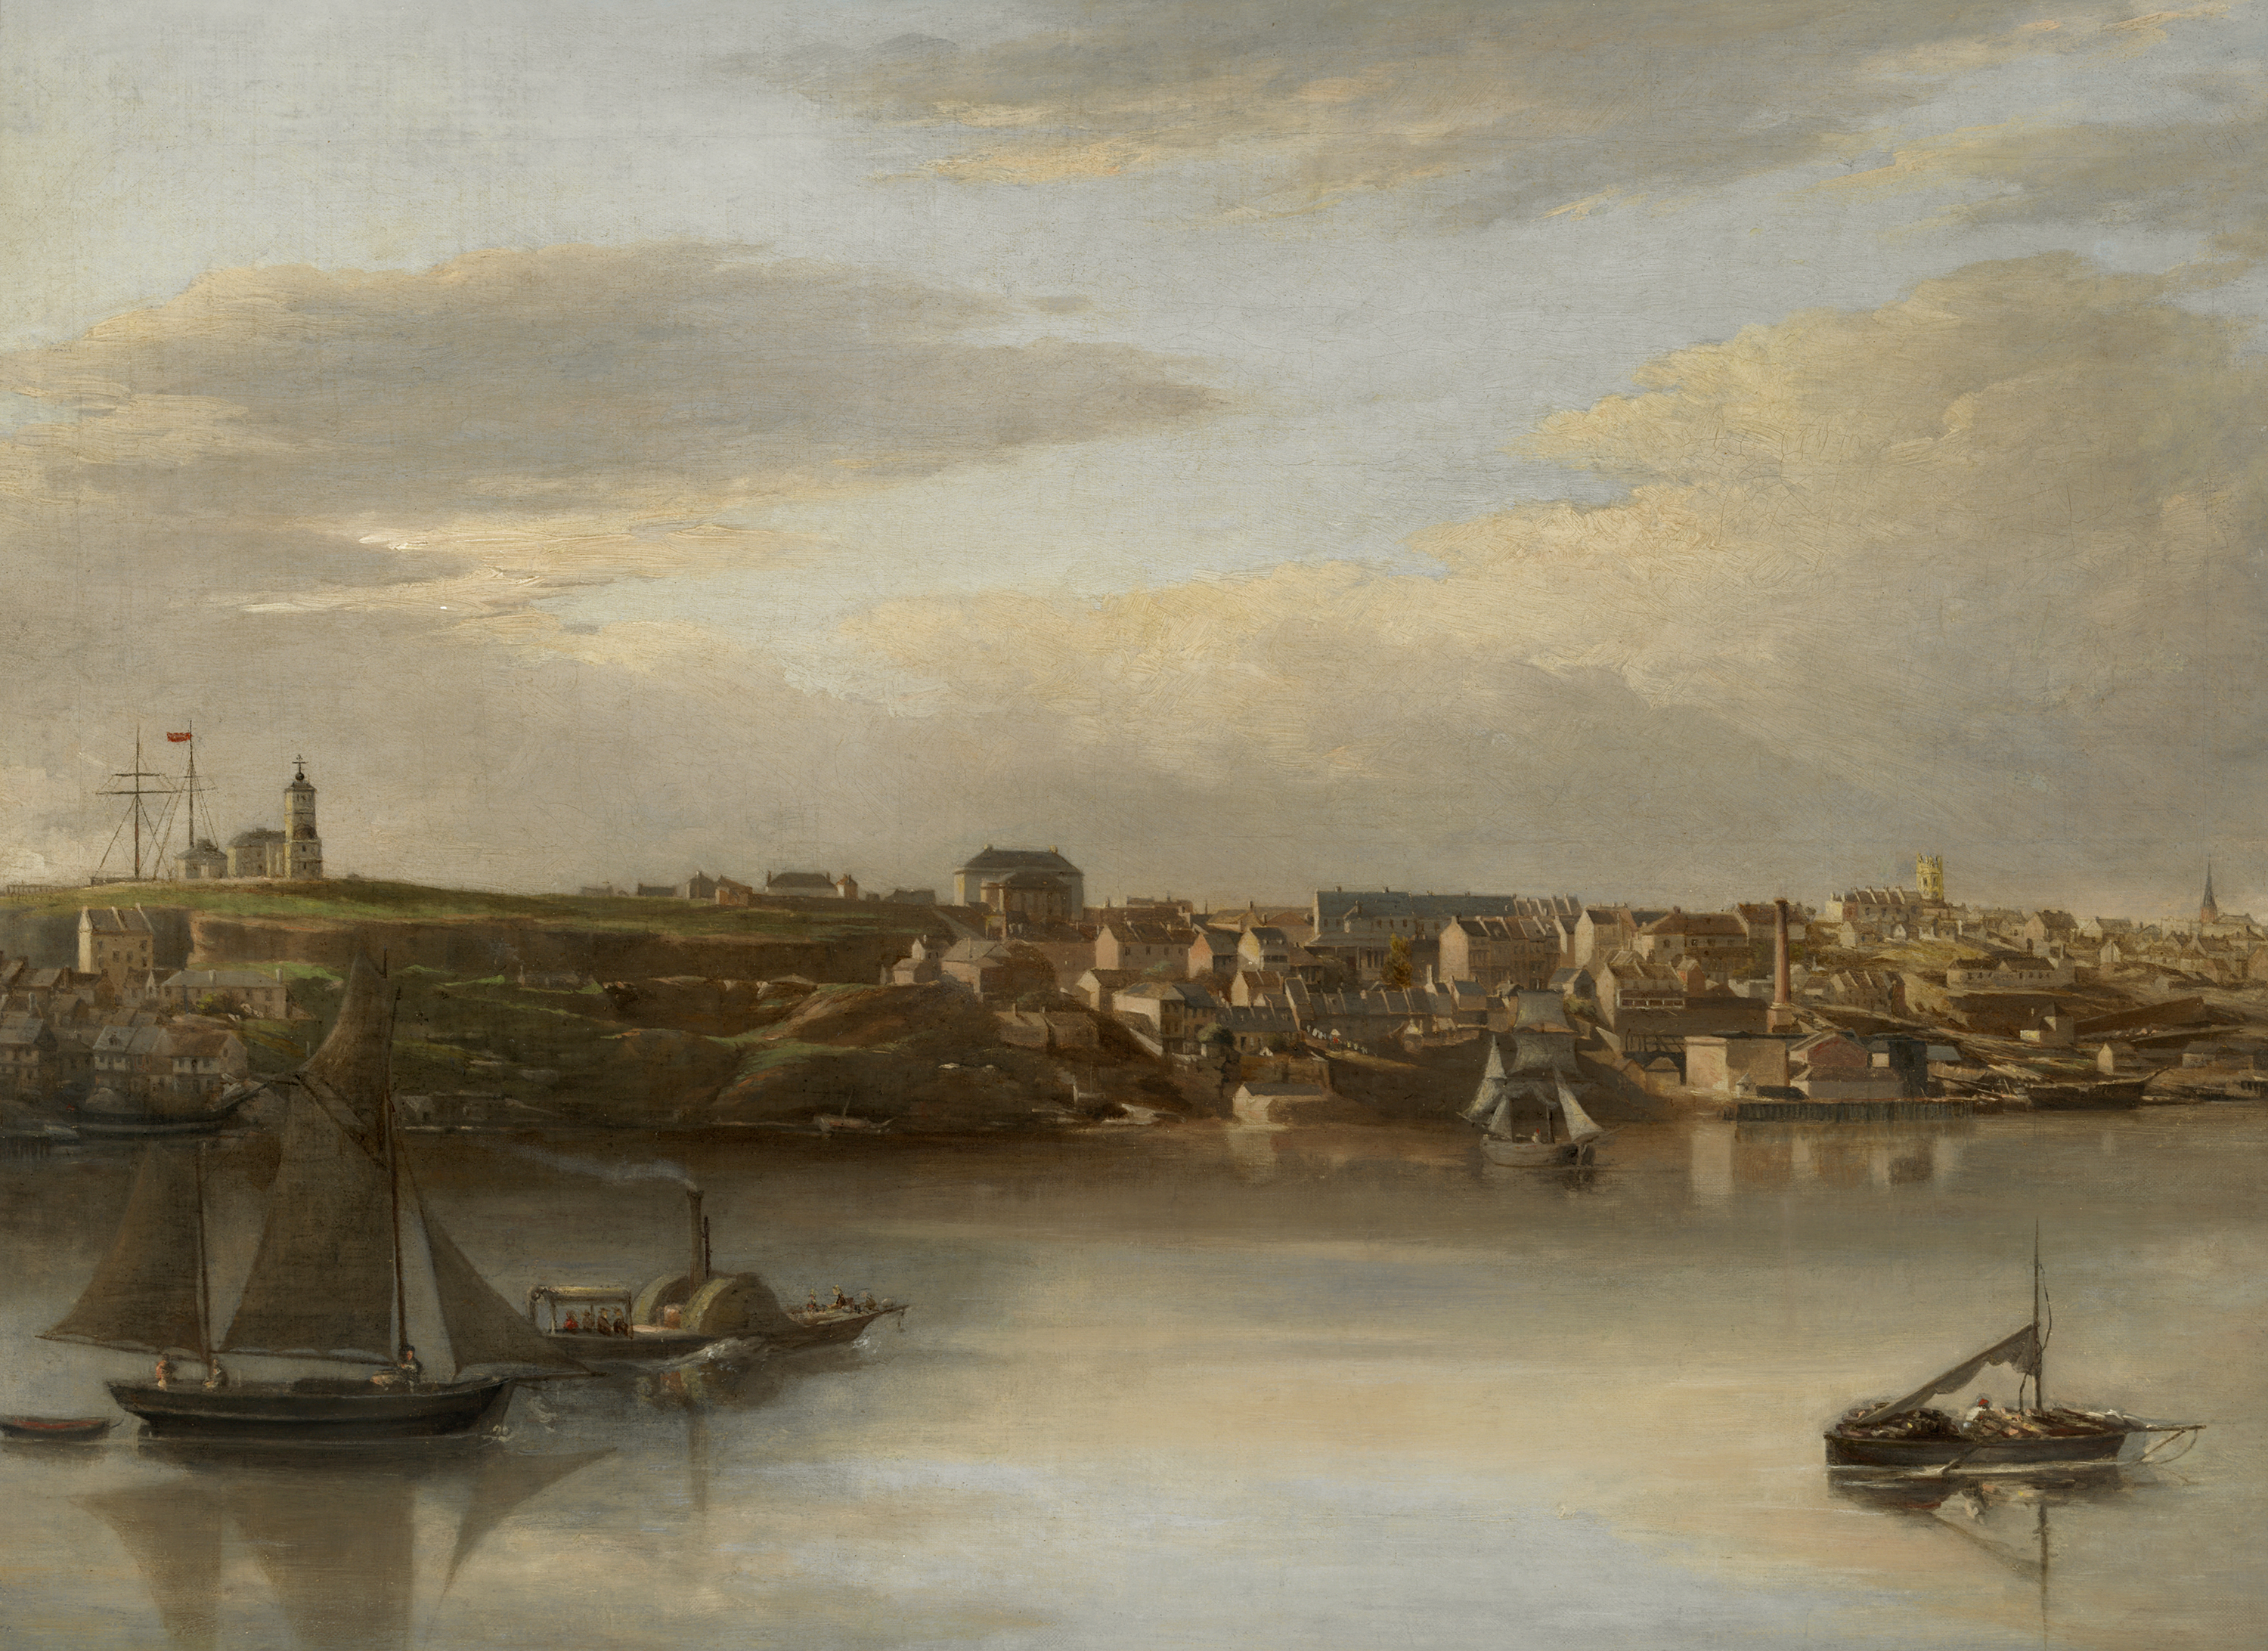 Painting of a harbour scene.